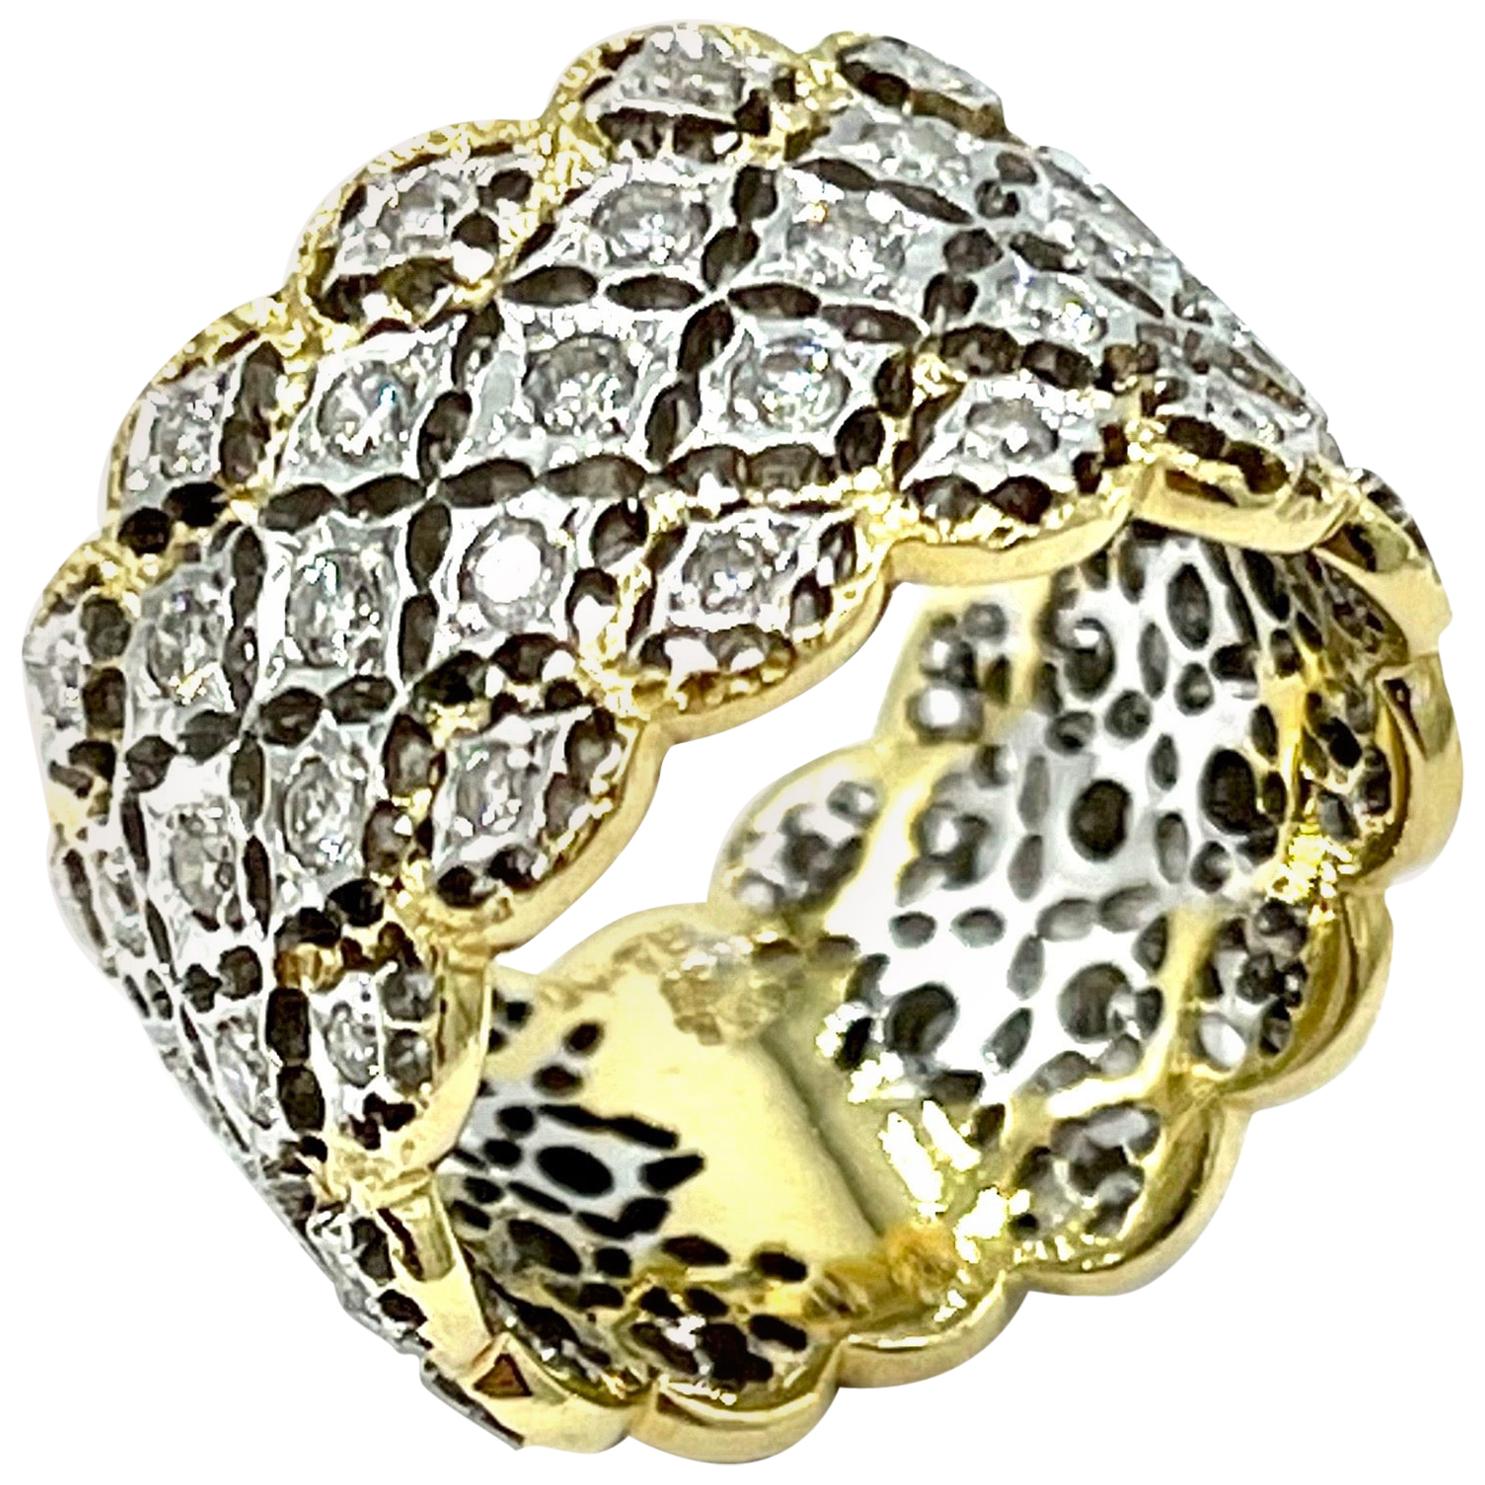 0.78 Carat Round Brilliant Diamond and 18 Carat White and Yellow Gold Band Ring